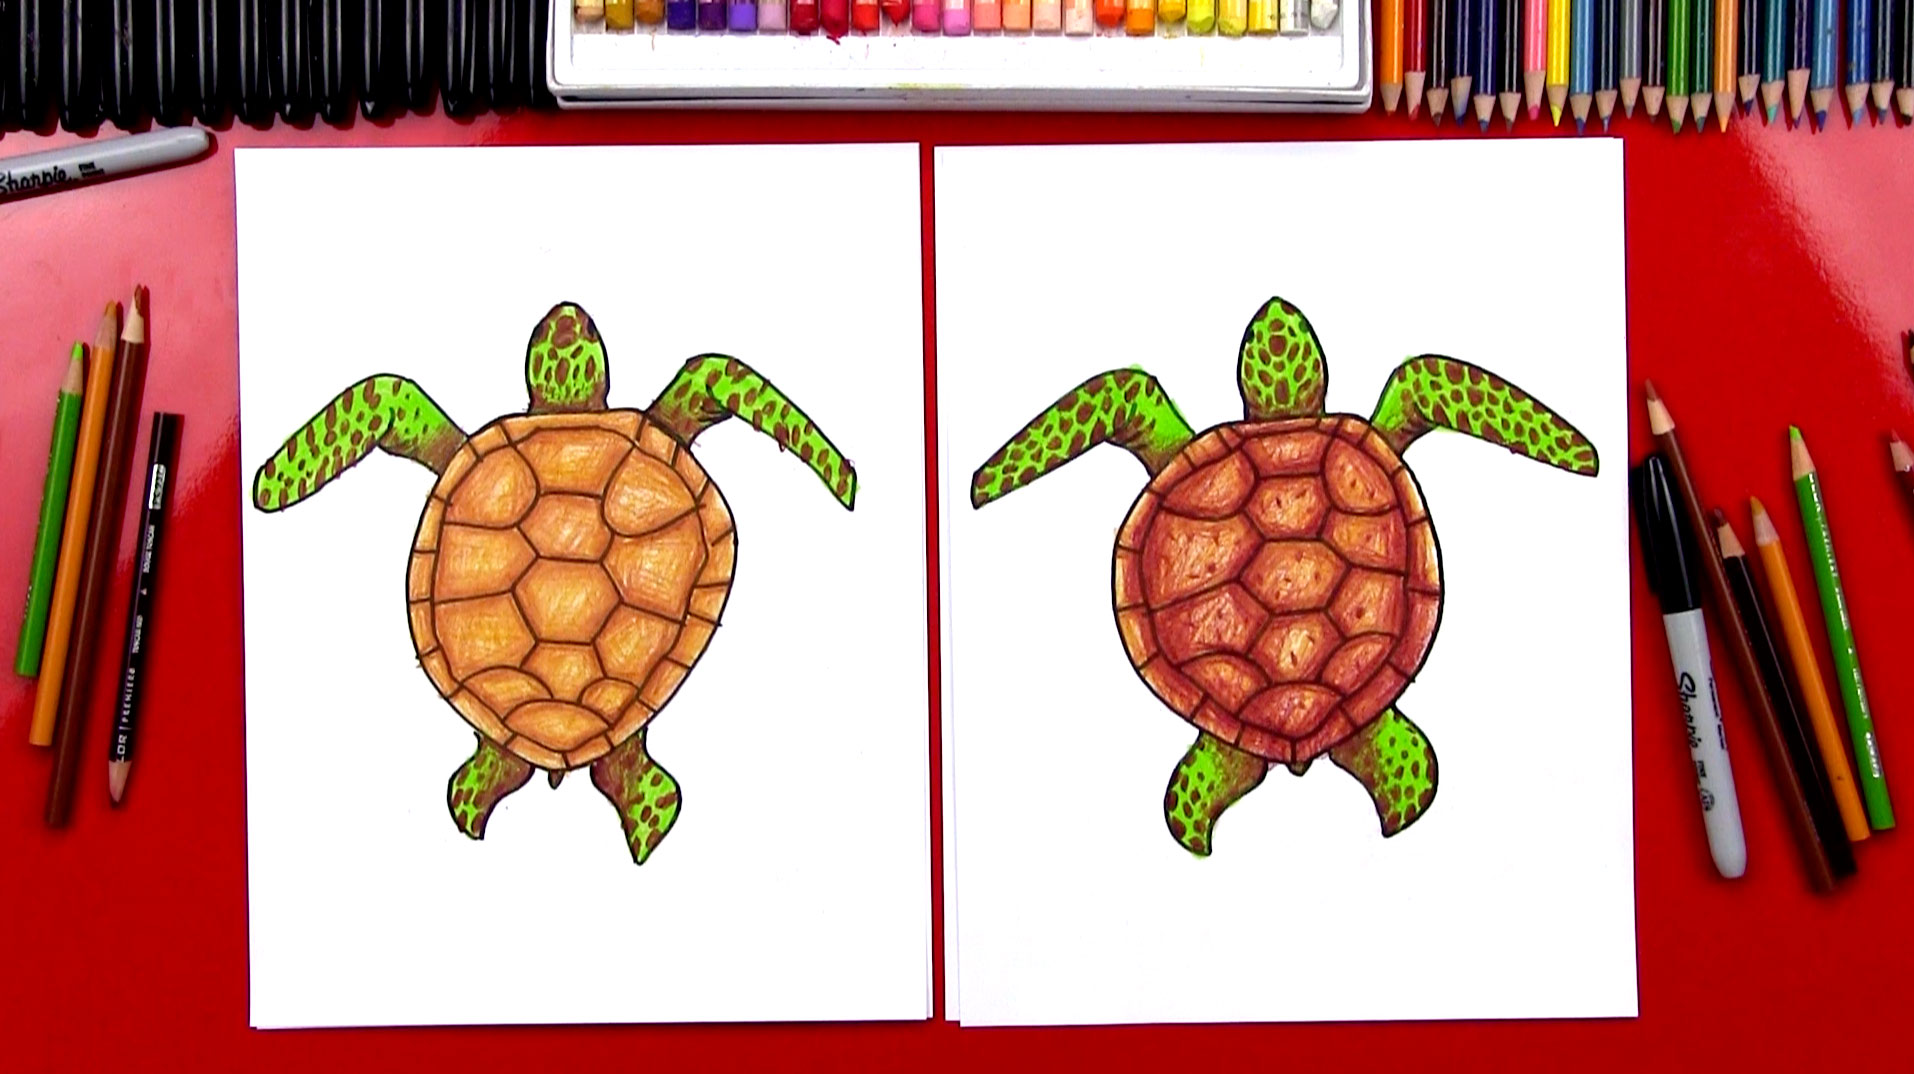 How to Draw a Sea Turtle - Easy Drawing Tutorial For Kids